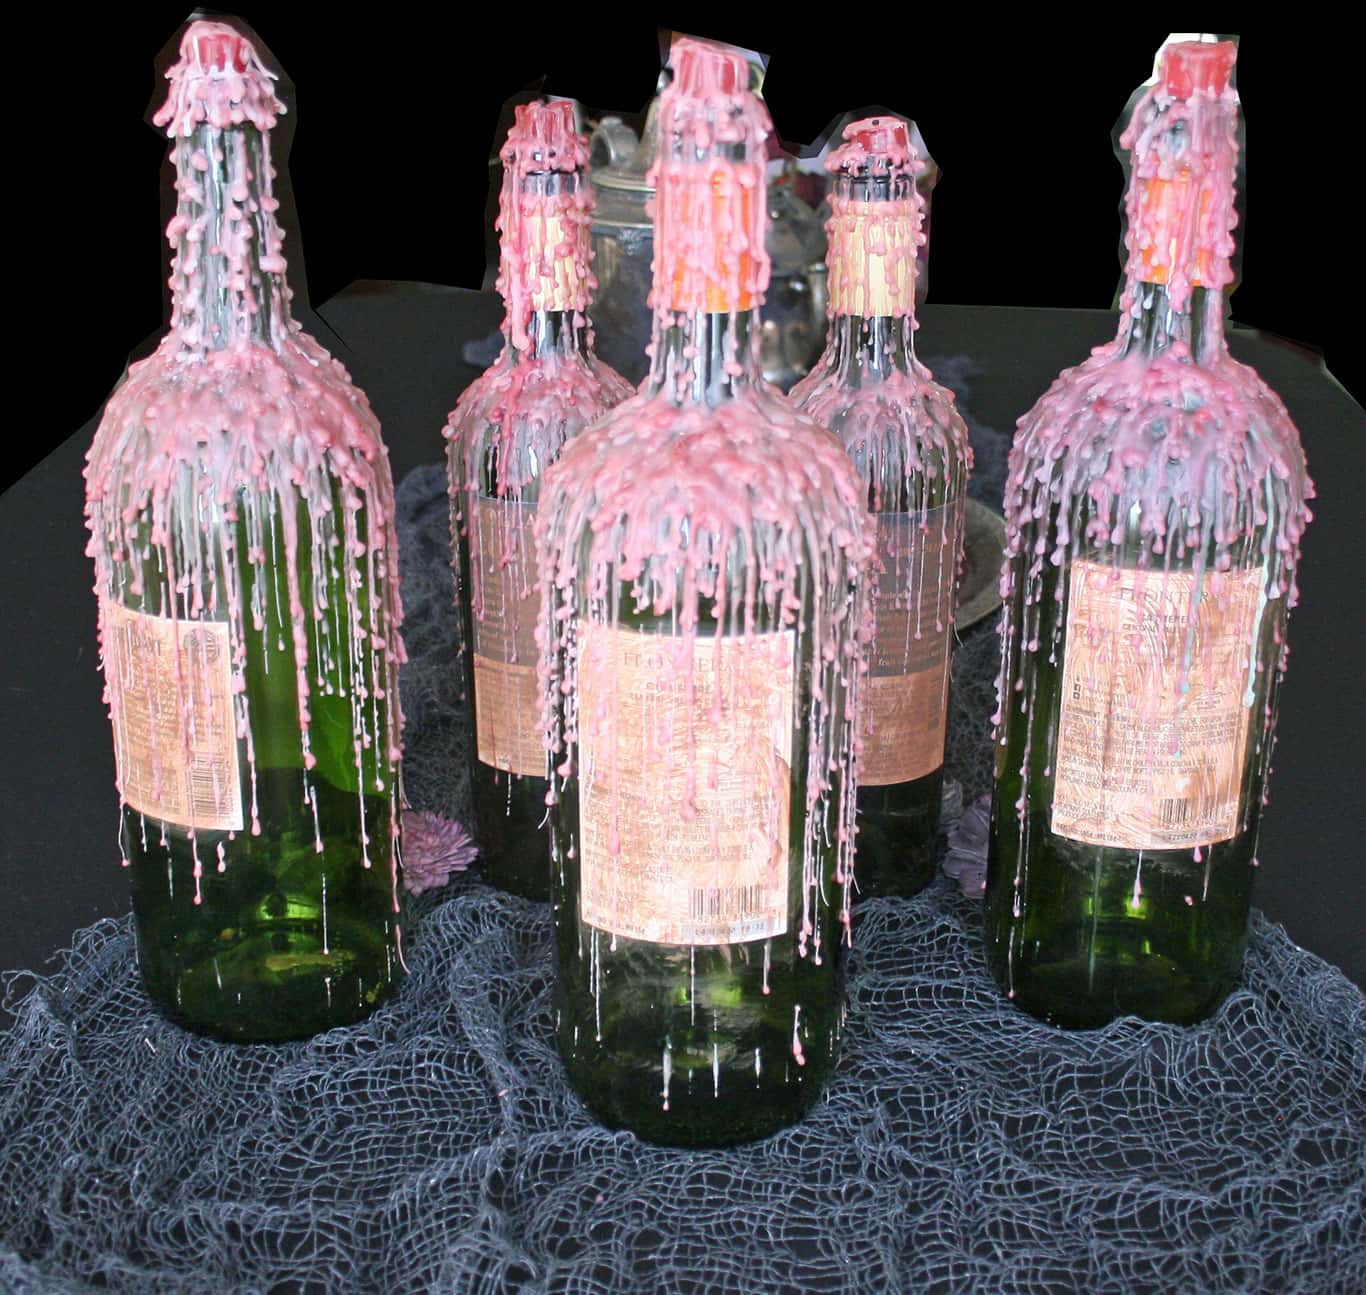 Candle wax dripped wine bottles for Halloween